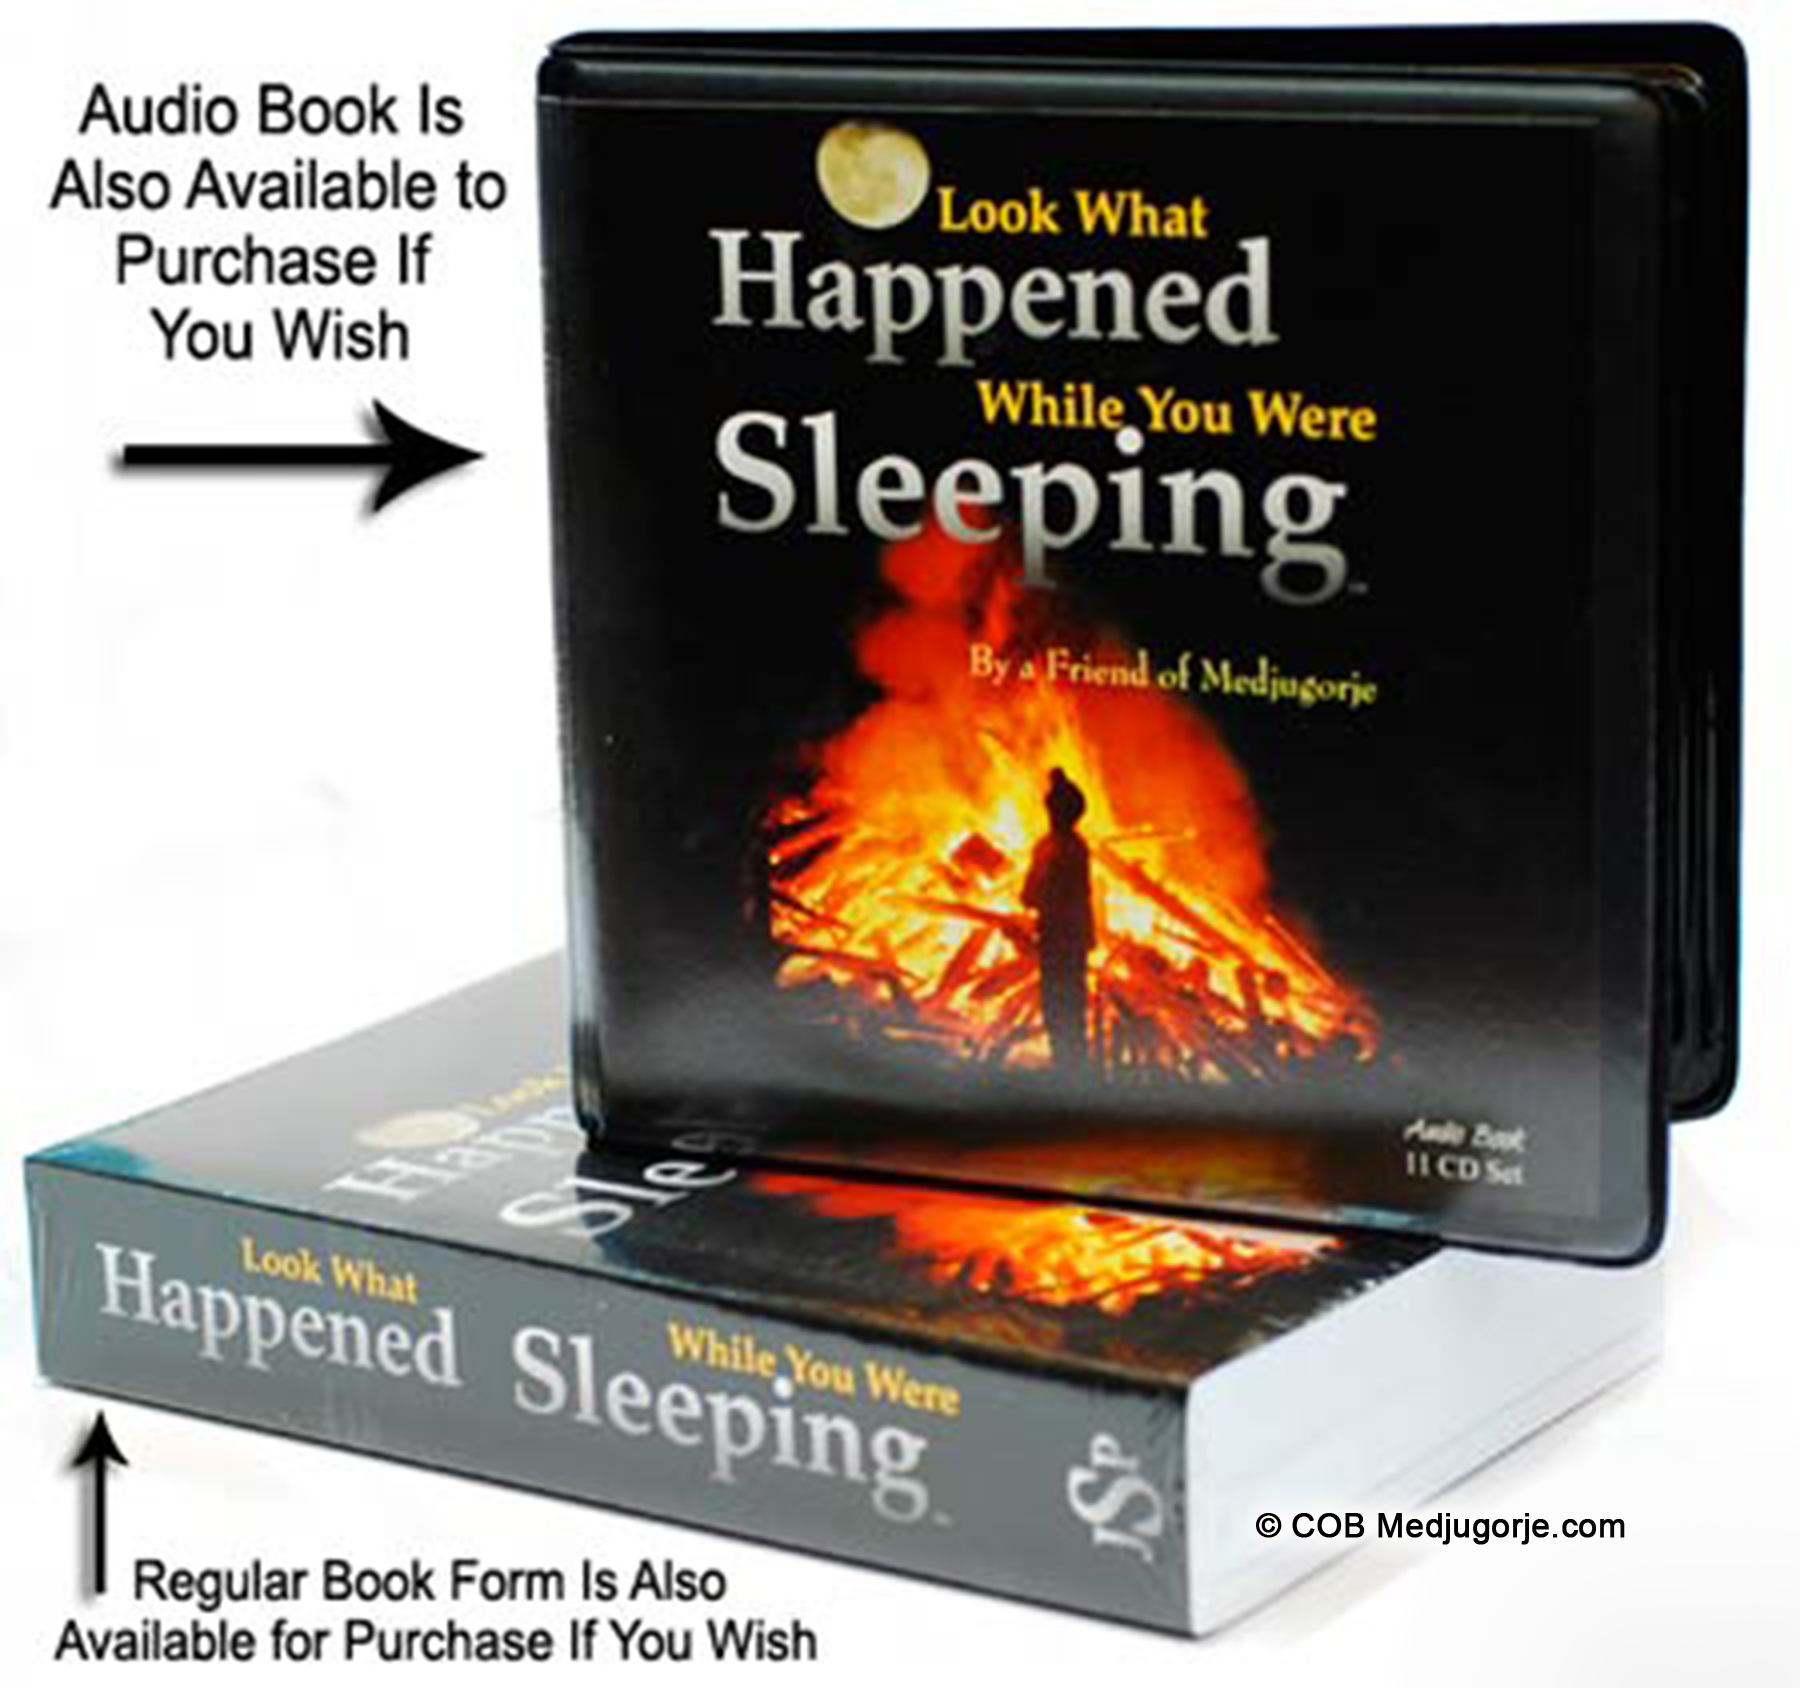 Look What Happened While You Were Sleeping Book and Audio Book